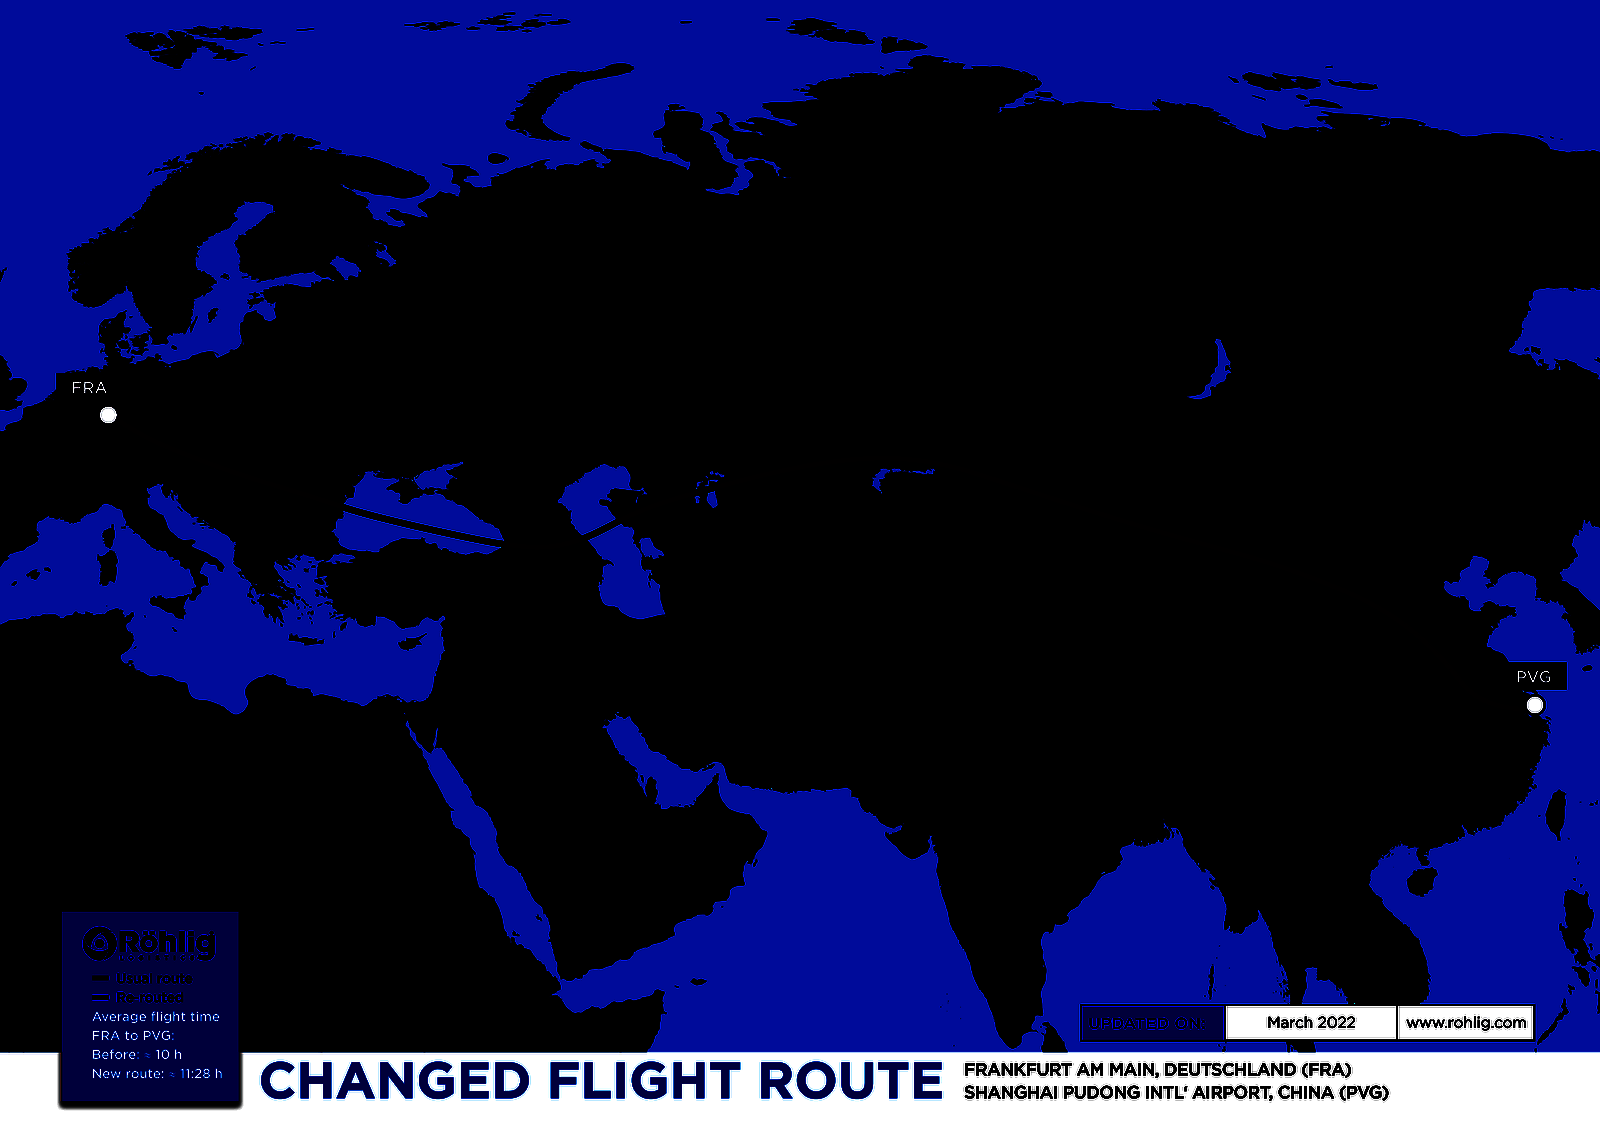 Changed flight routes from Frankfurt (FRA) to Shanghai Pudong Intl' Airport, China (PVG).